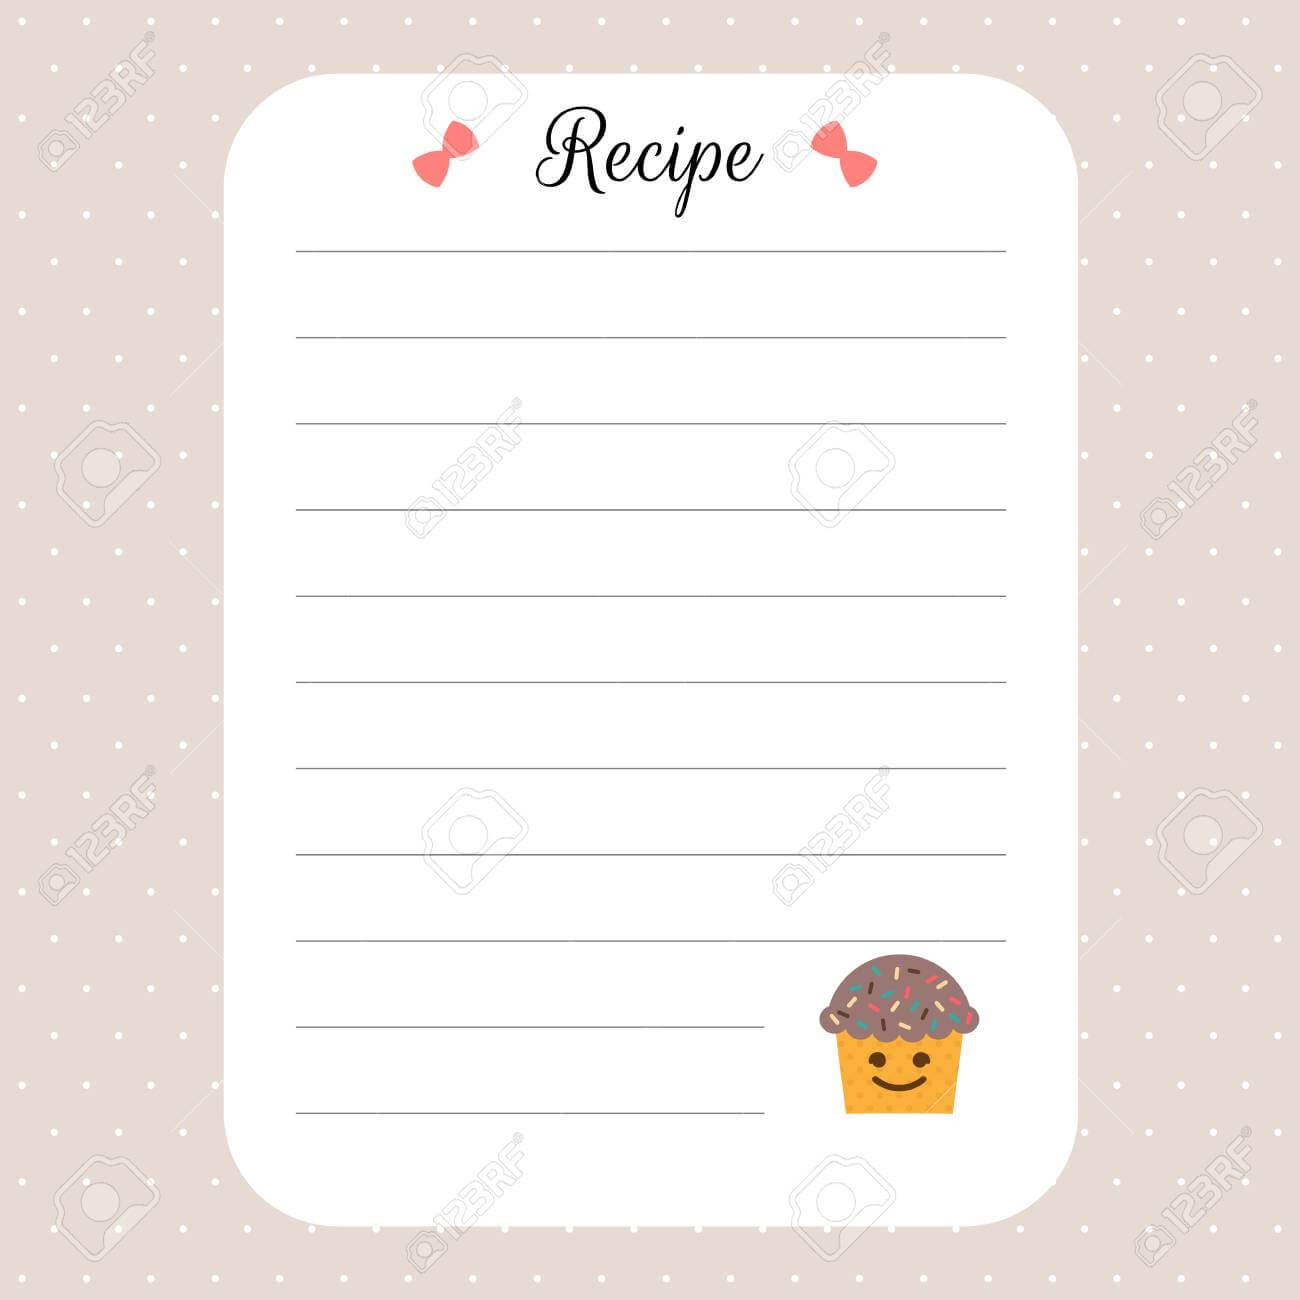 Recipe Card Template. Cookbook Template Page. For Restaurant,.. Pertaining To Restaurant Recipe Card Template